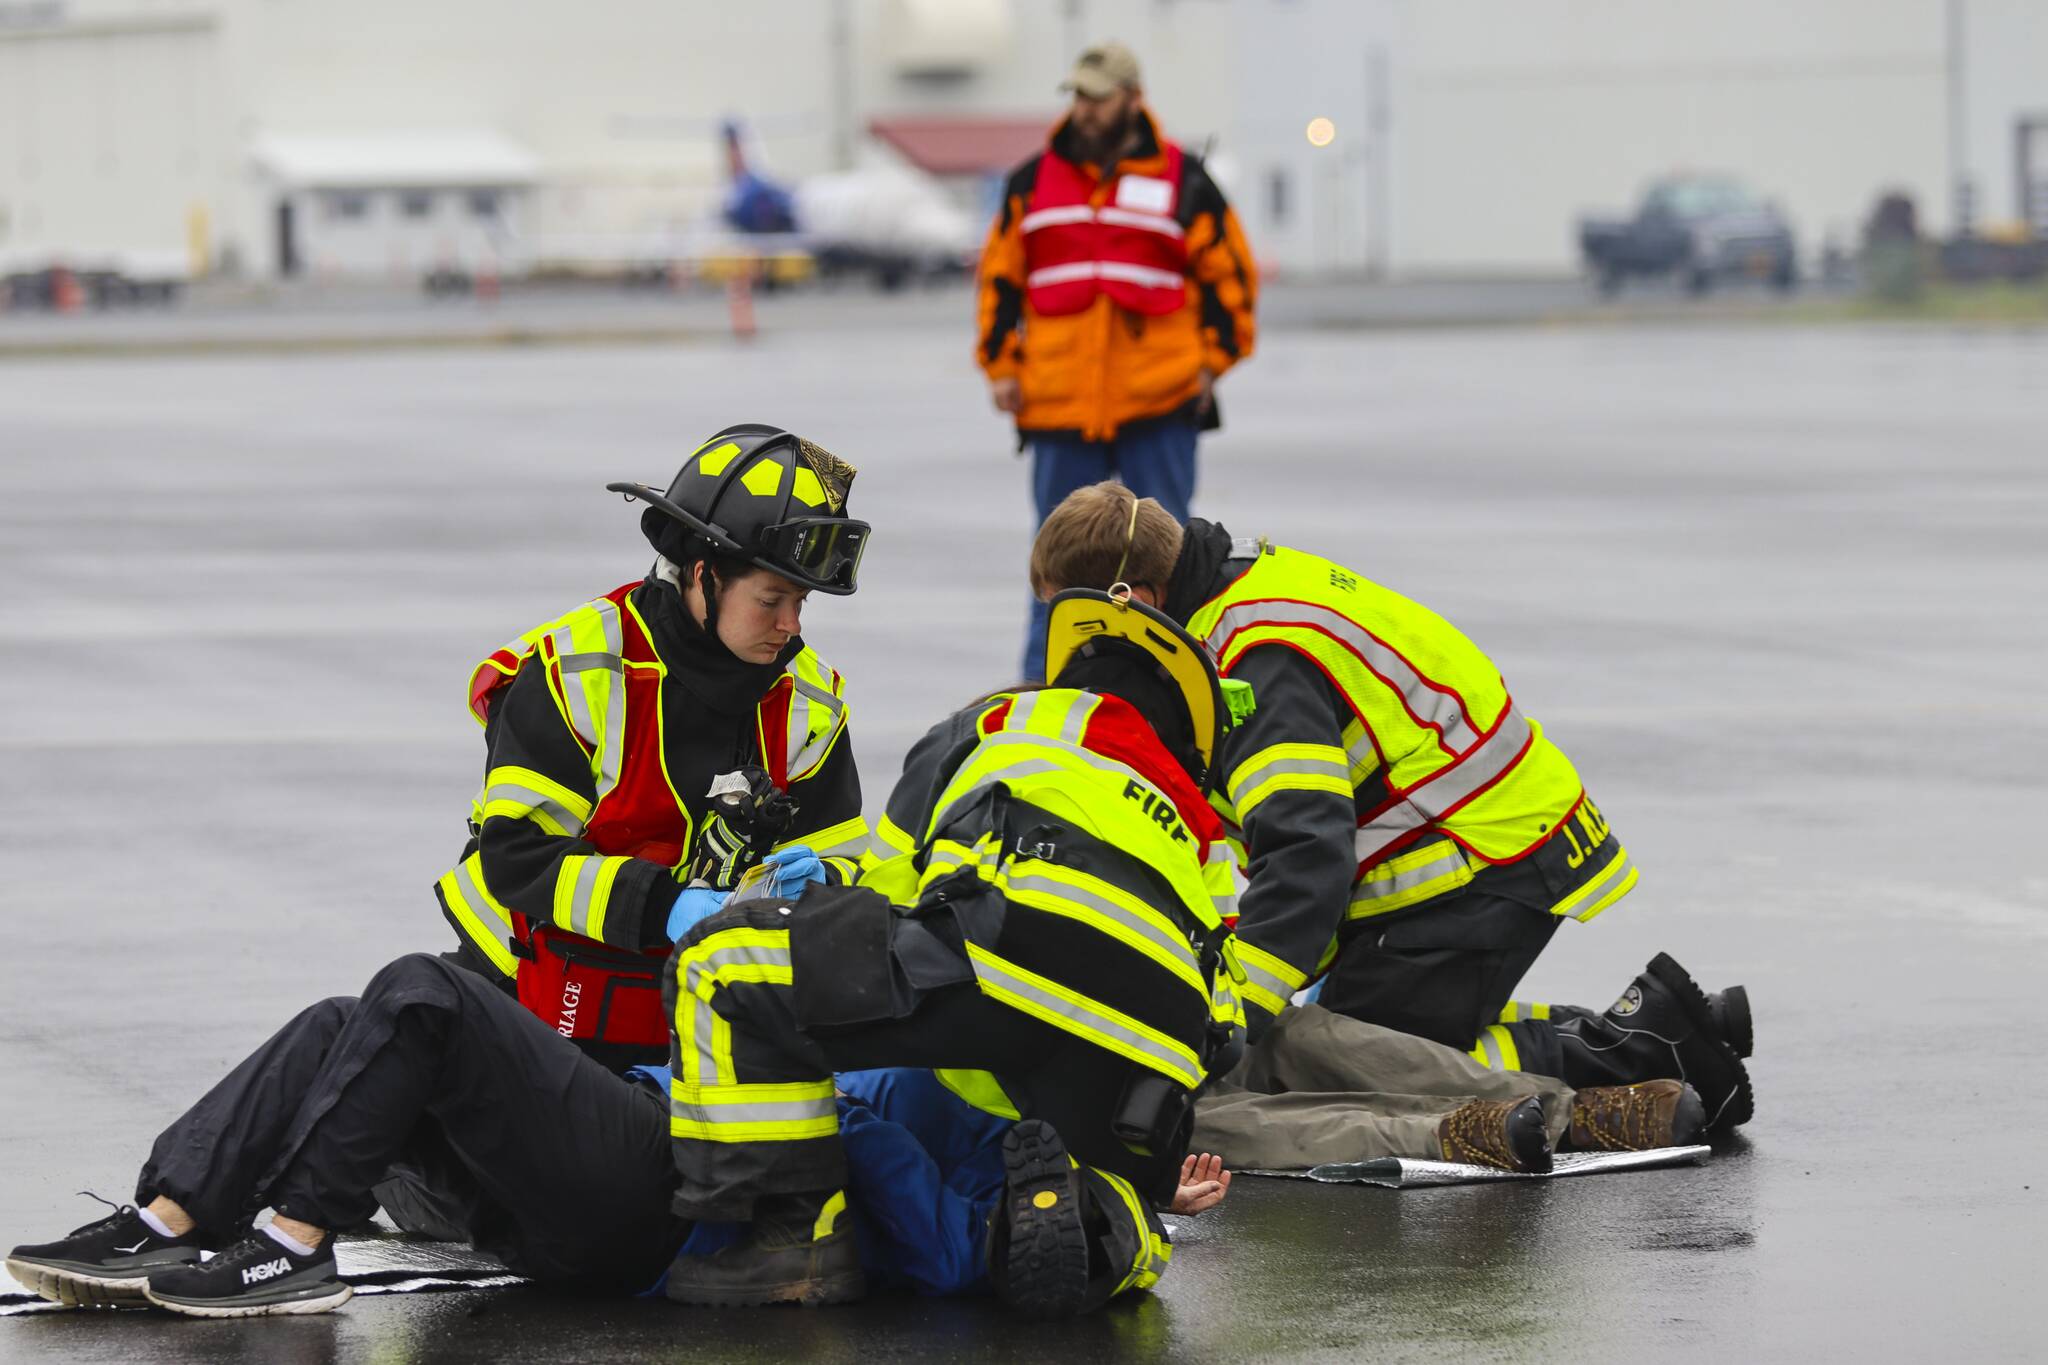 Capital City Fire/Rescue personnel triage a casualty during an exercise simulating a plane crash at Juneau International Airport on July 23, 2022. (Michael S. Lockett / Juneau Empire)